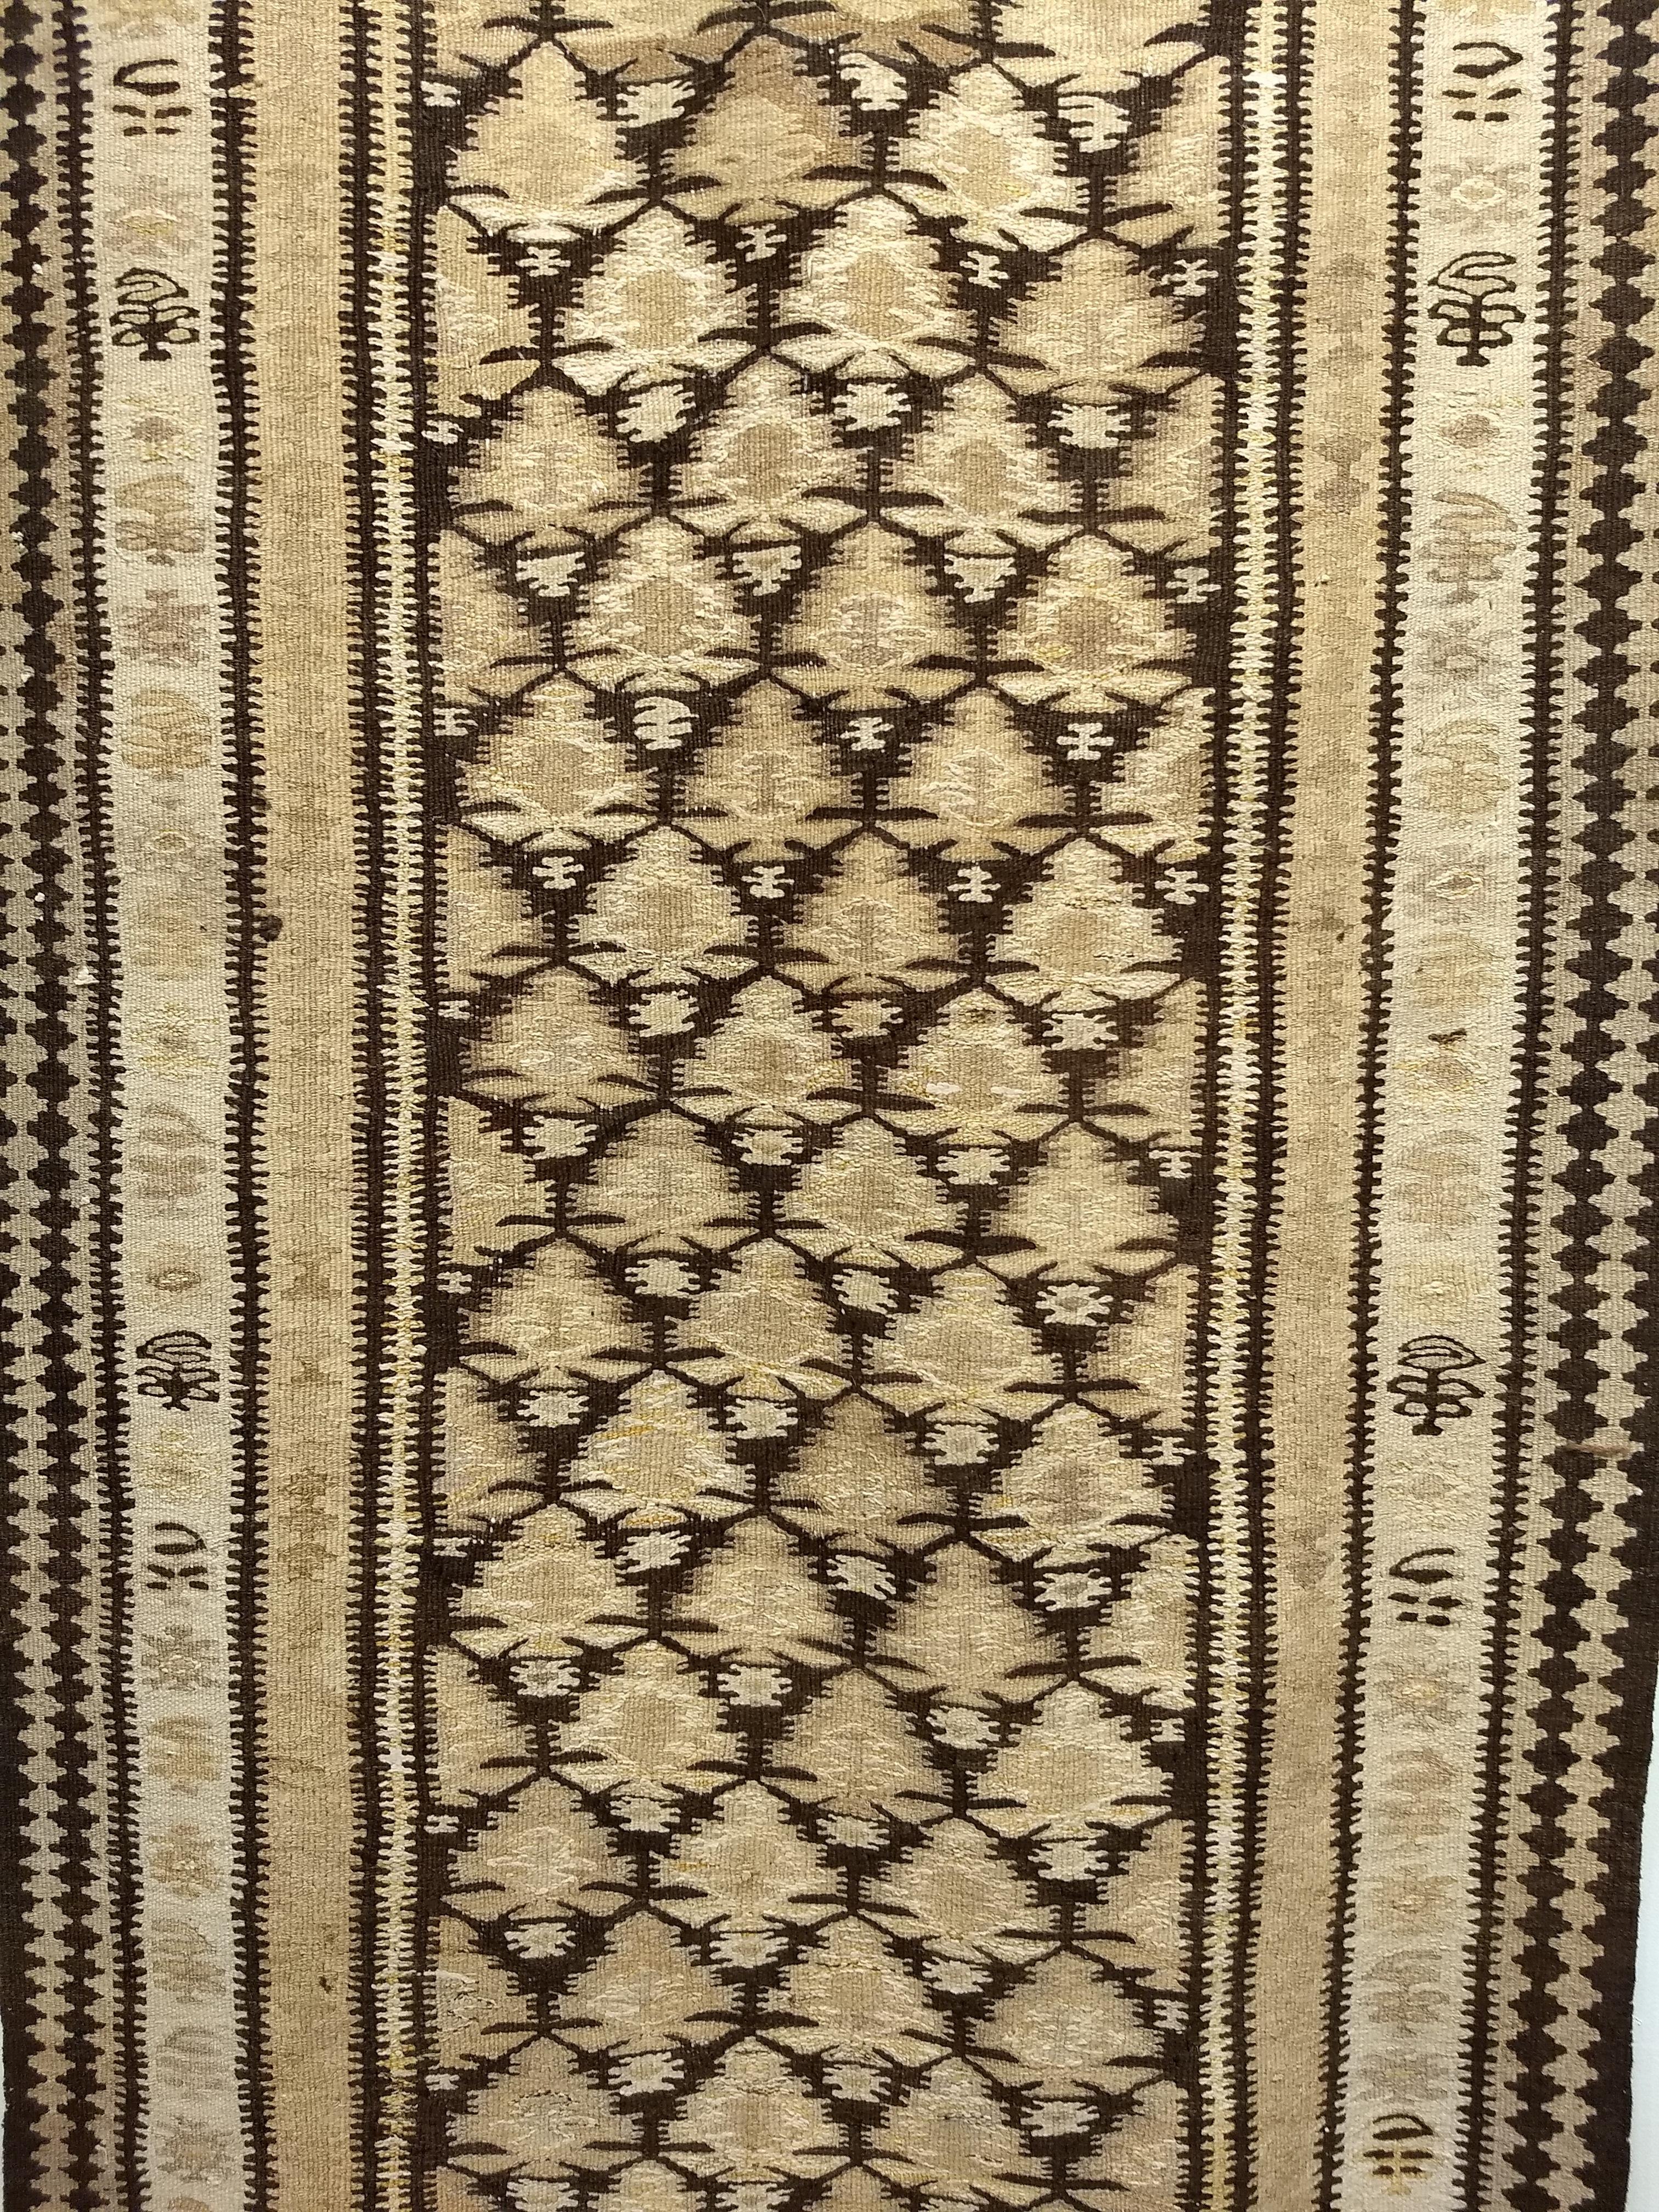 Vintage Persian Qazvin Kilim Runner in Pale Yellow, Brown, Ivory For Sale 1